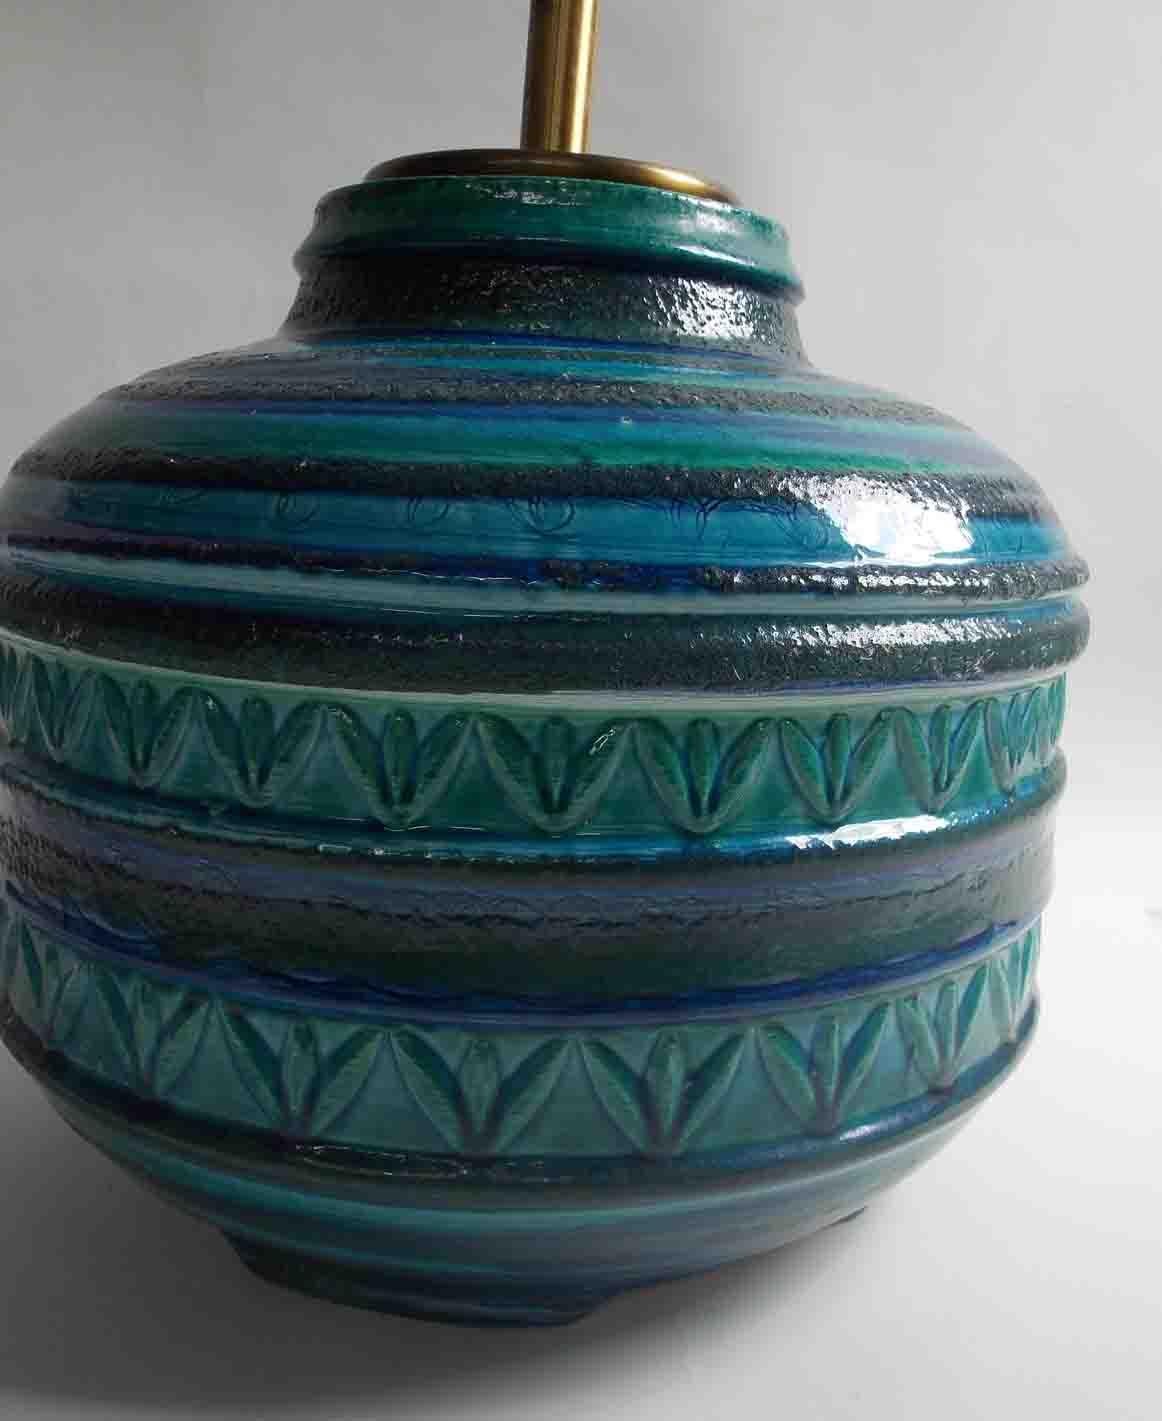 A large scale lamp, covered in Rimini blue glaze featuring incised Sgraffito decoration.